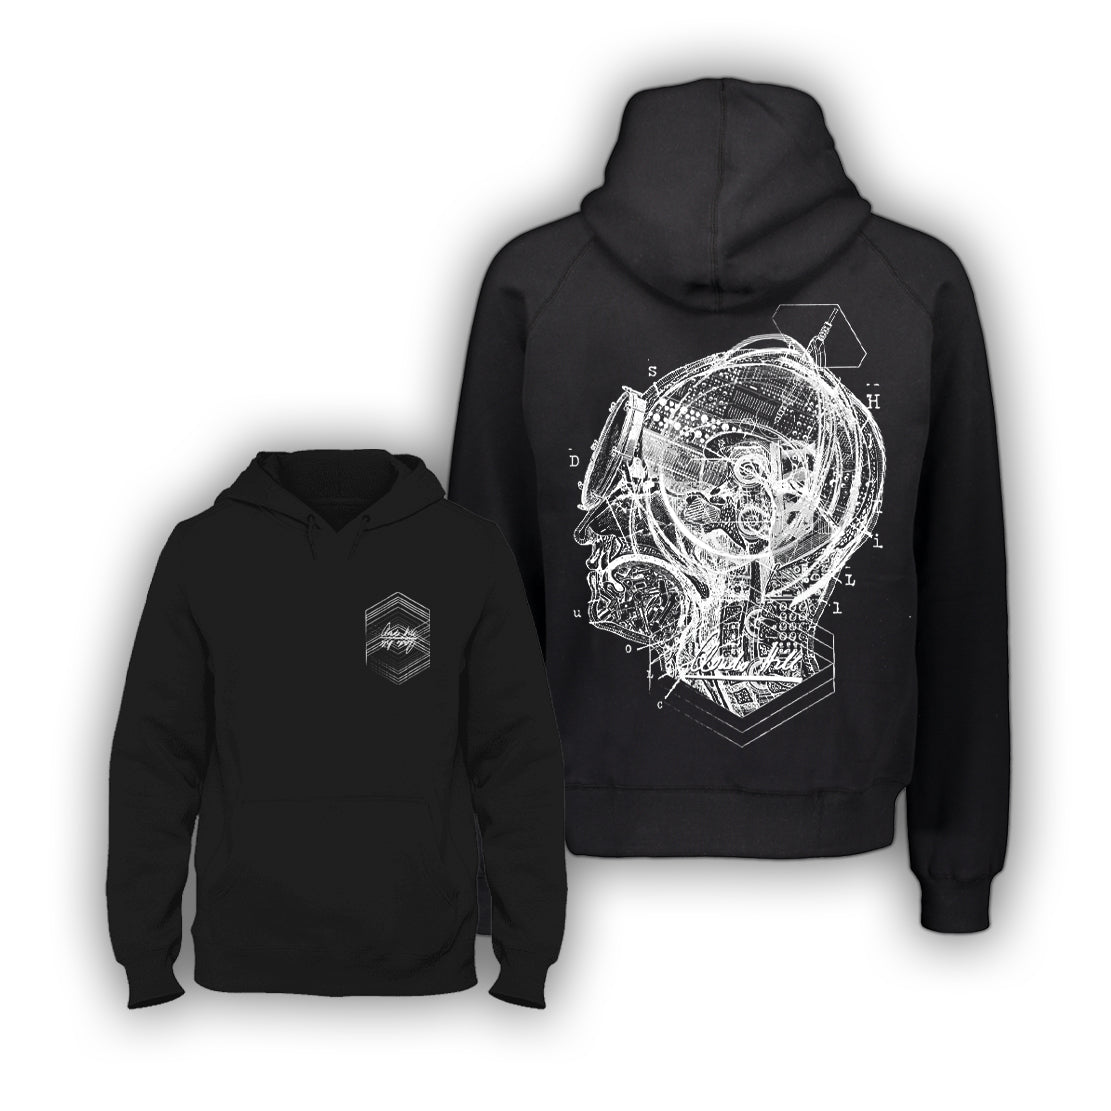 Clouds Hill "Hidden Speculations" - DIVER (Black) Hoodie